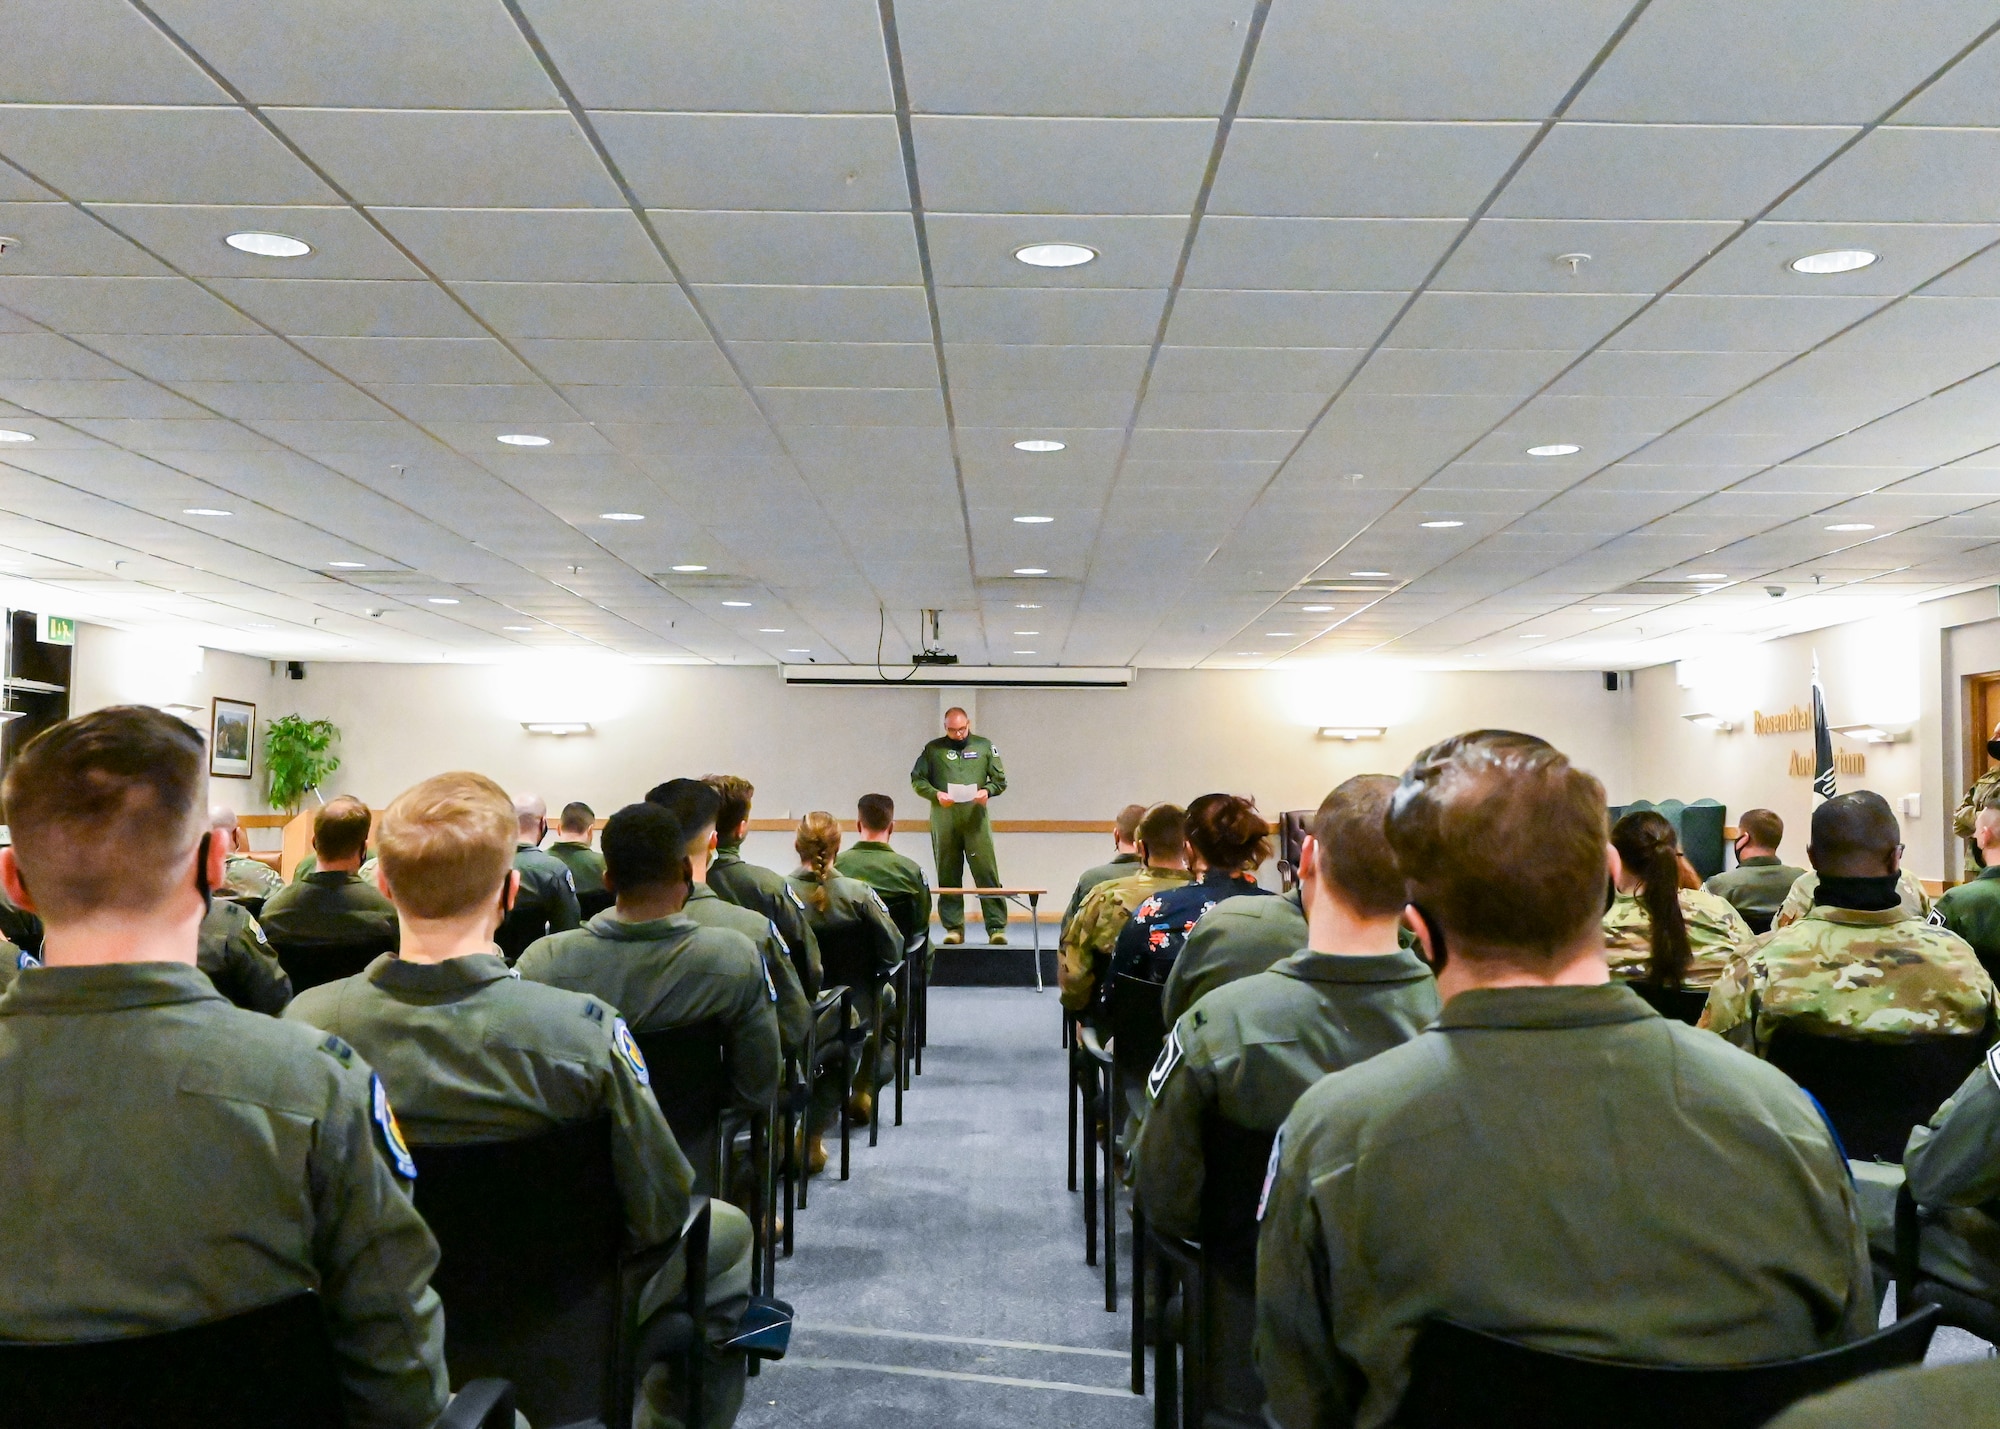 Lt. Col. Ryan Ferdinandsen, 351st Air Refueling Squadron commander, congratulates the squadron on their win of the 2020 Gen. Carl A. Spaatz Trophy for best performing air refueling squadron in the U.S. Air Force during a commander’s call at Royal Air Force Mildenhall, May 11, 2021. Since the award’s inception, the award has only been won by an overseas squadron twice; the 351st ARS made history in 2014 as the first overseas unit to be named the most outstanding air refueling squadron in the Air Force. (U.S. Air Force photo by Staff Sgt. Malissa Lott)